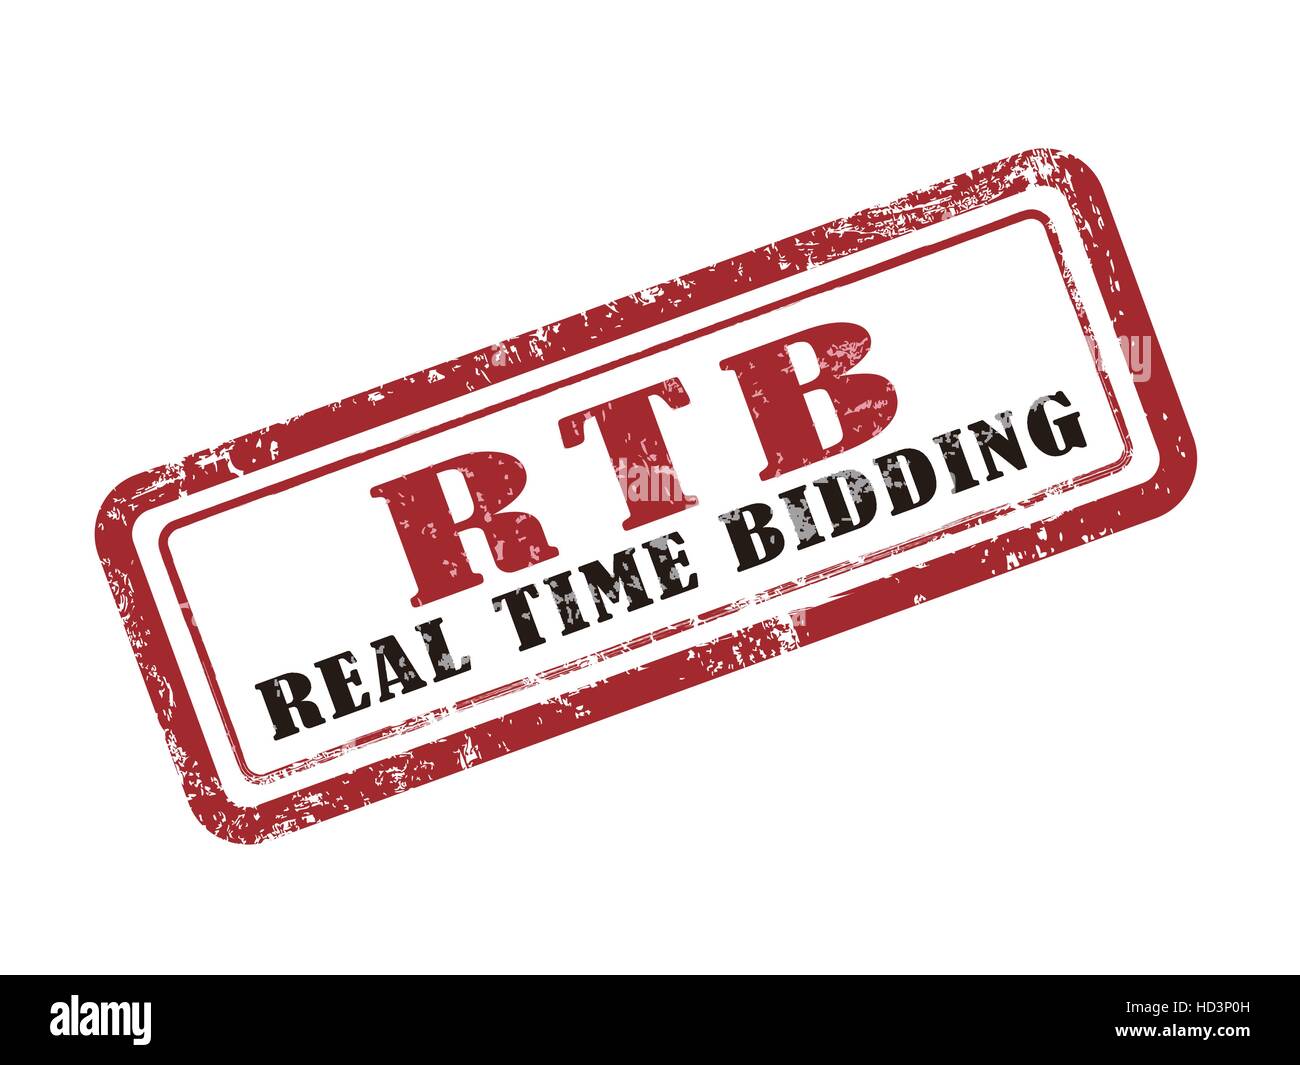 stamp real time bidding in red over white background Stock Vector